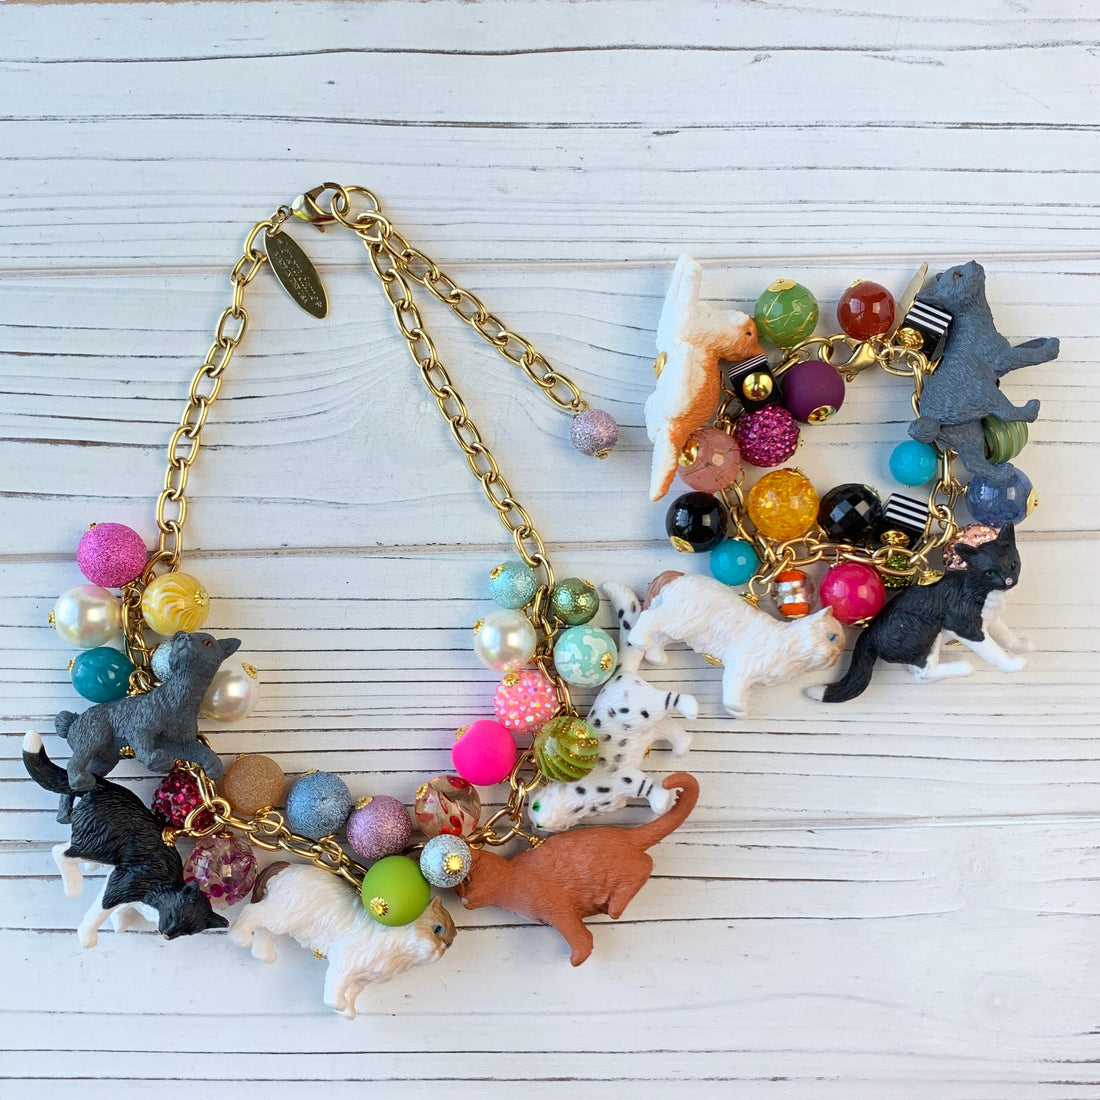 Lenora Dame Must Love Cats Charm Necklace